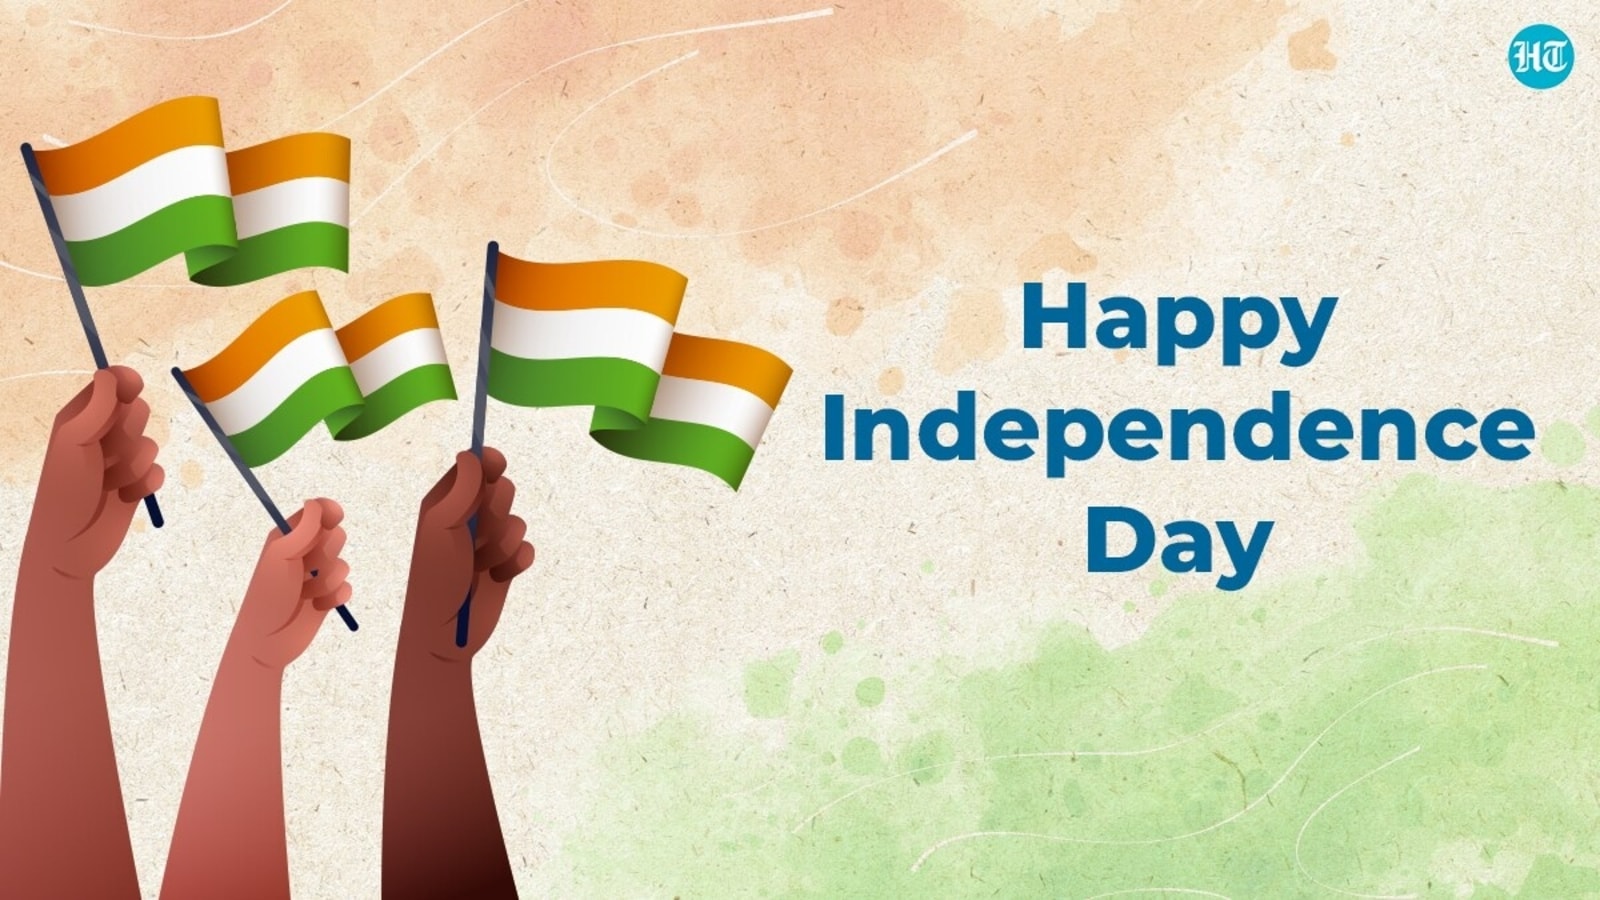 Incredible Compilation of Over 999+ Full 4K WhatsApp Independence Day Images